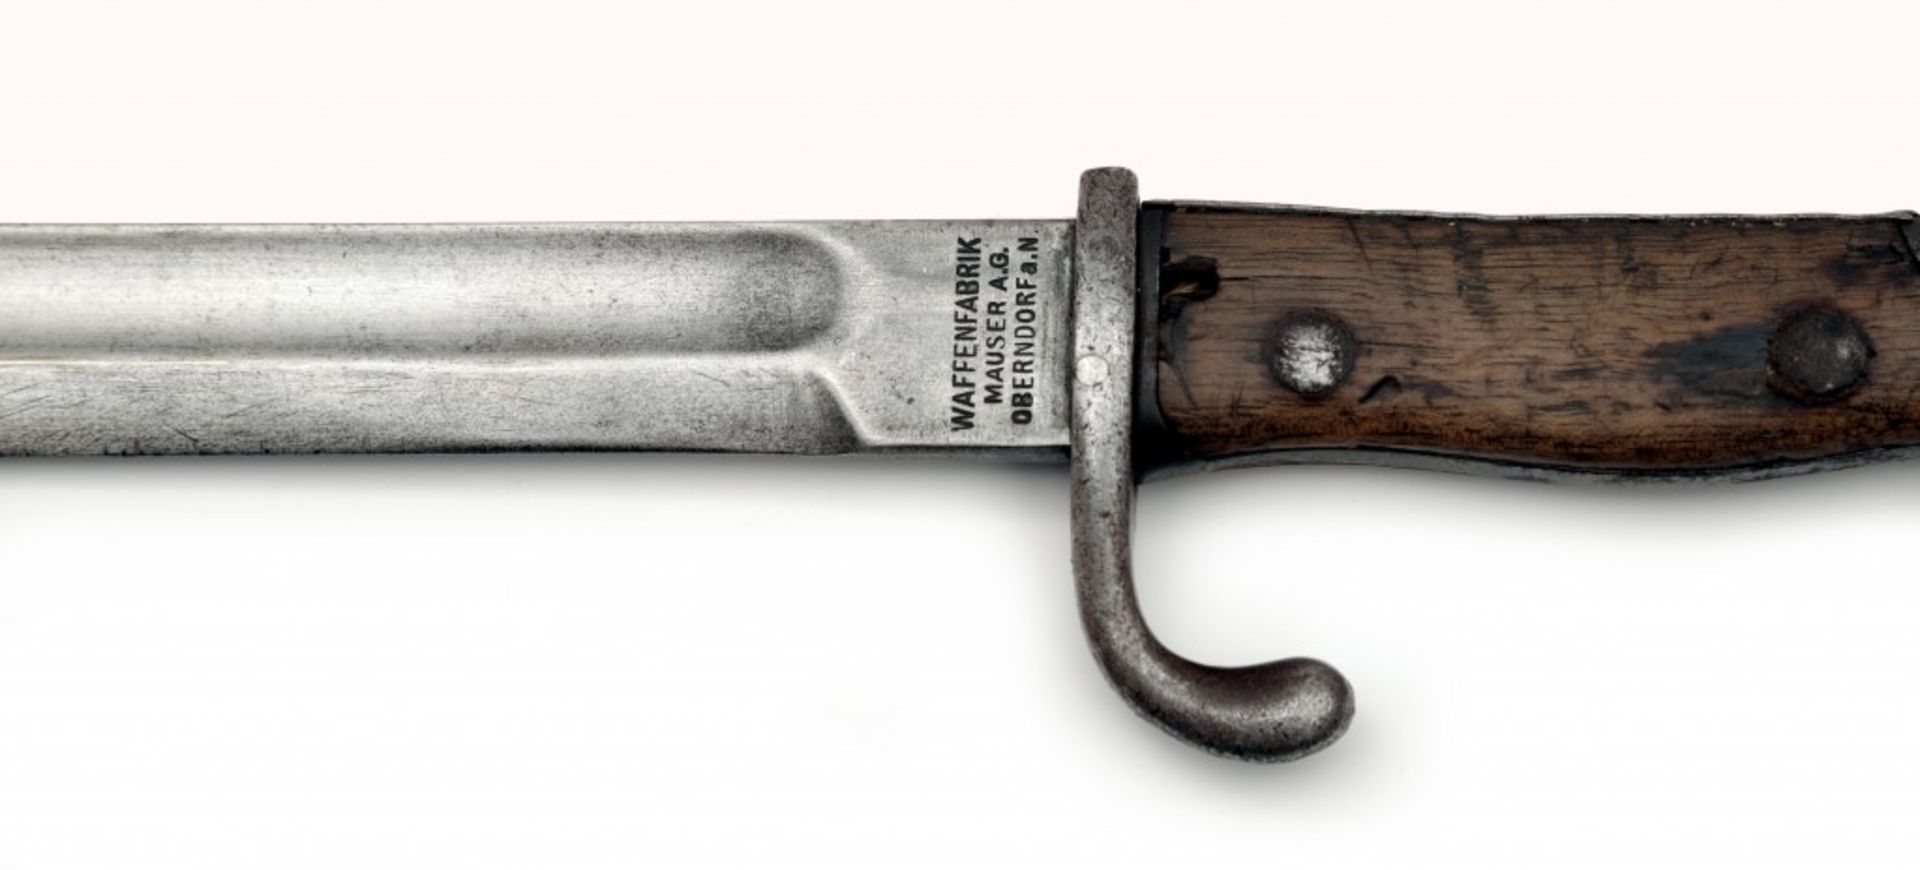 M1898/1905 Mauser Bayonet with Scabbard - Image 2 of 3